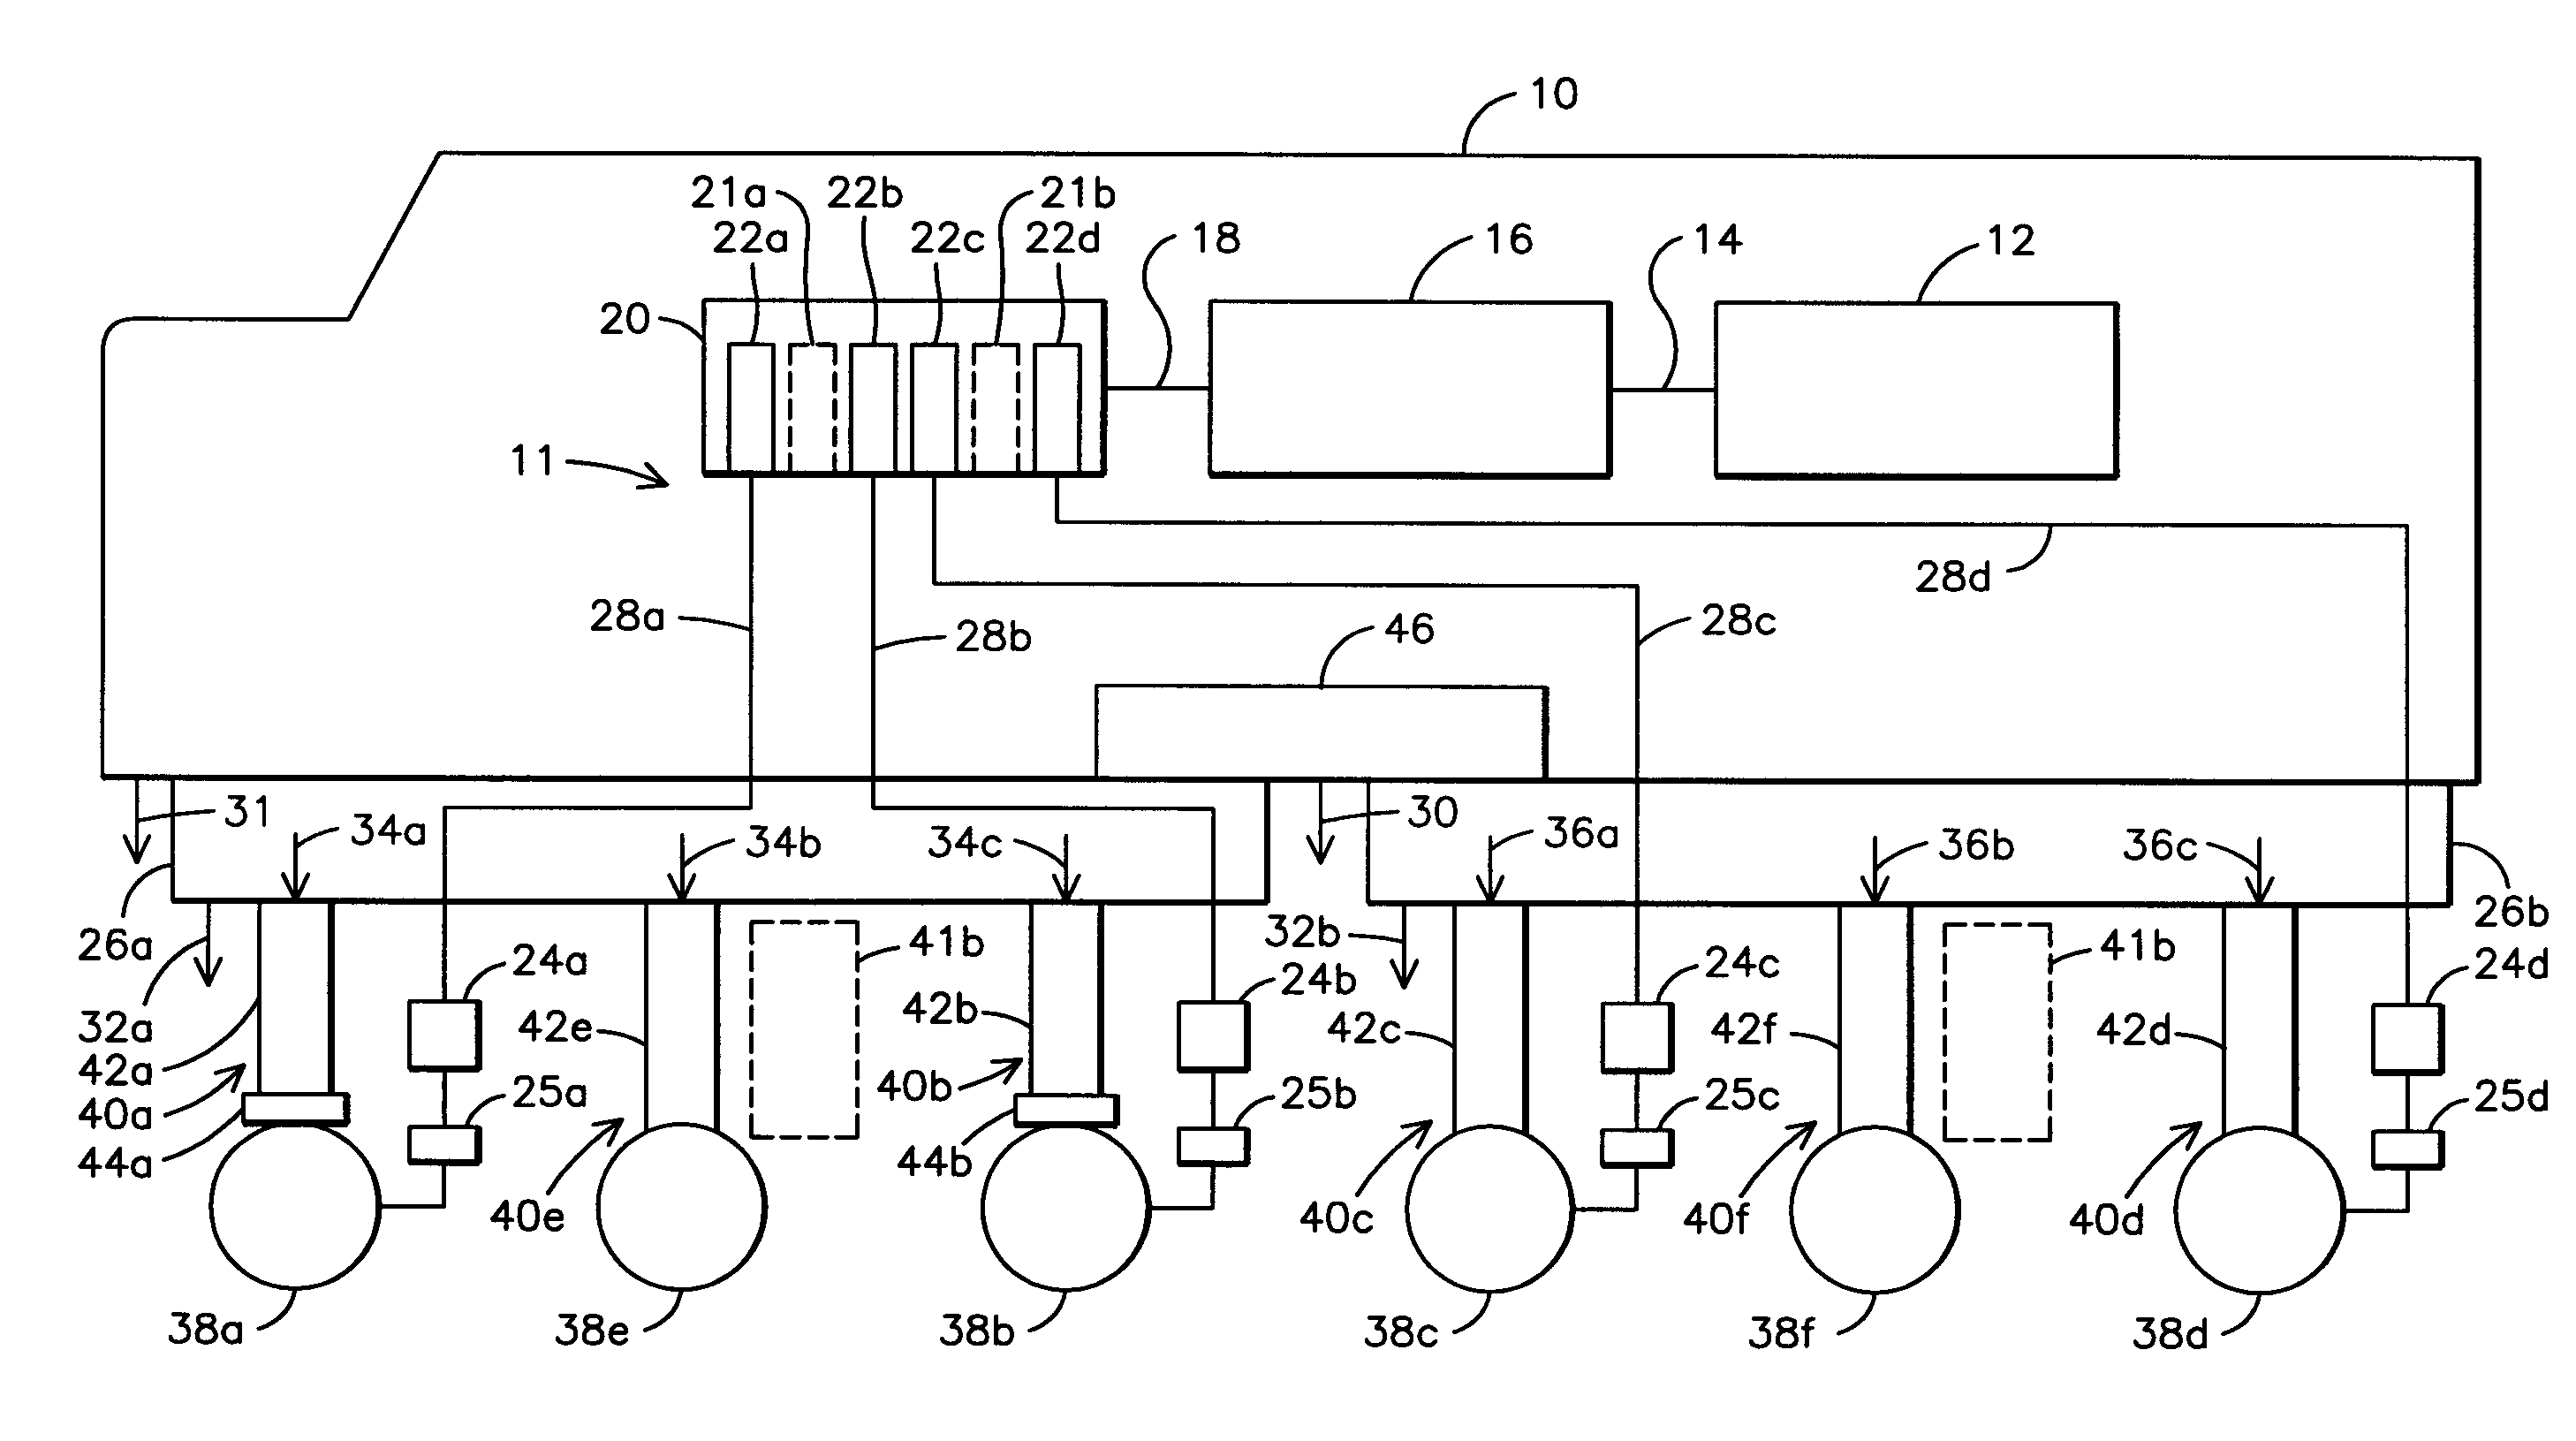 Kit and Method for Converting a Locomotive from a First Configuration to a Second Configuration